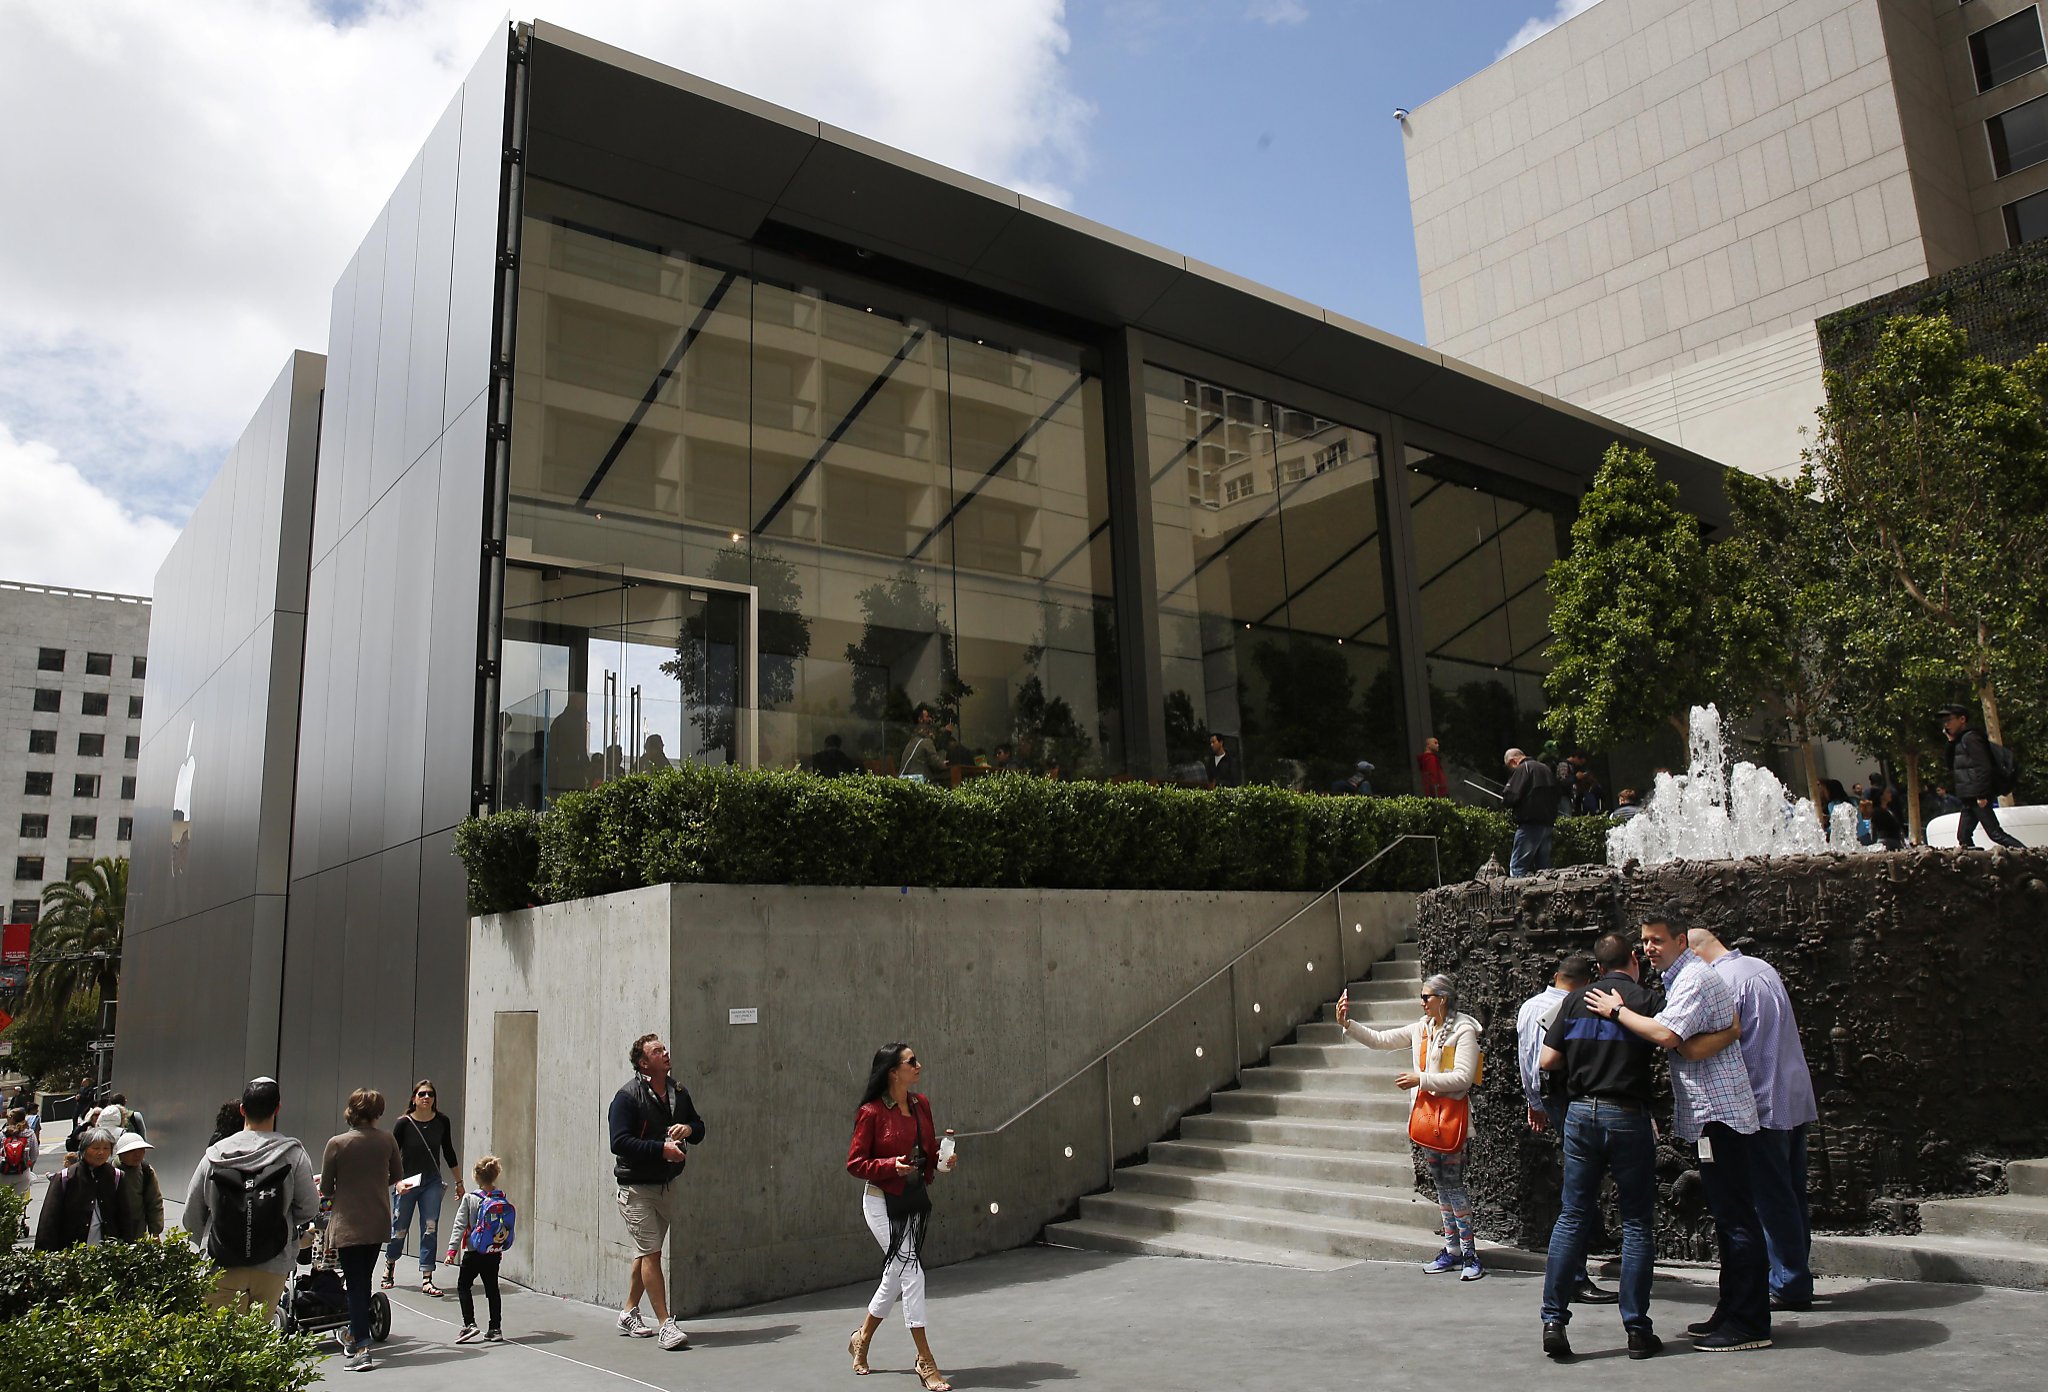 In Union Square, Apple Store is spiffy but plaza needs work